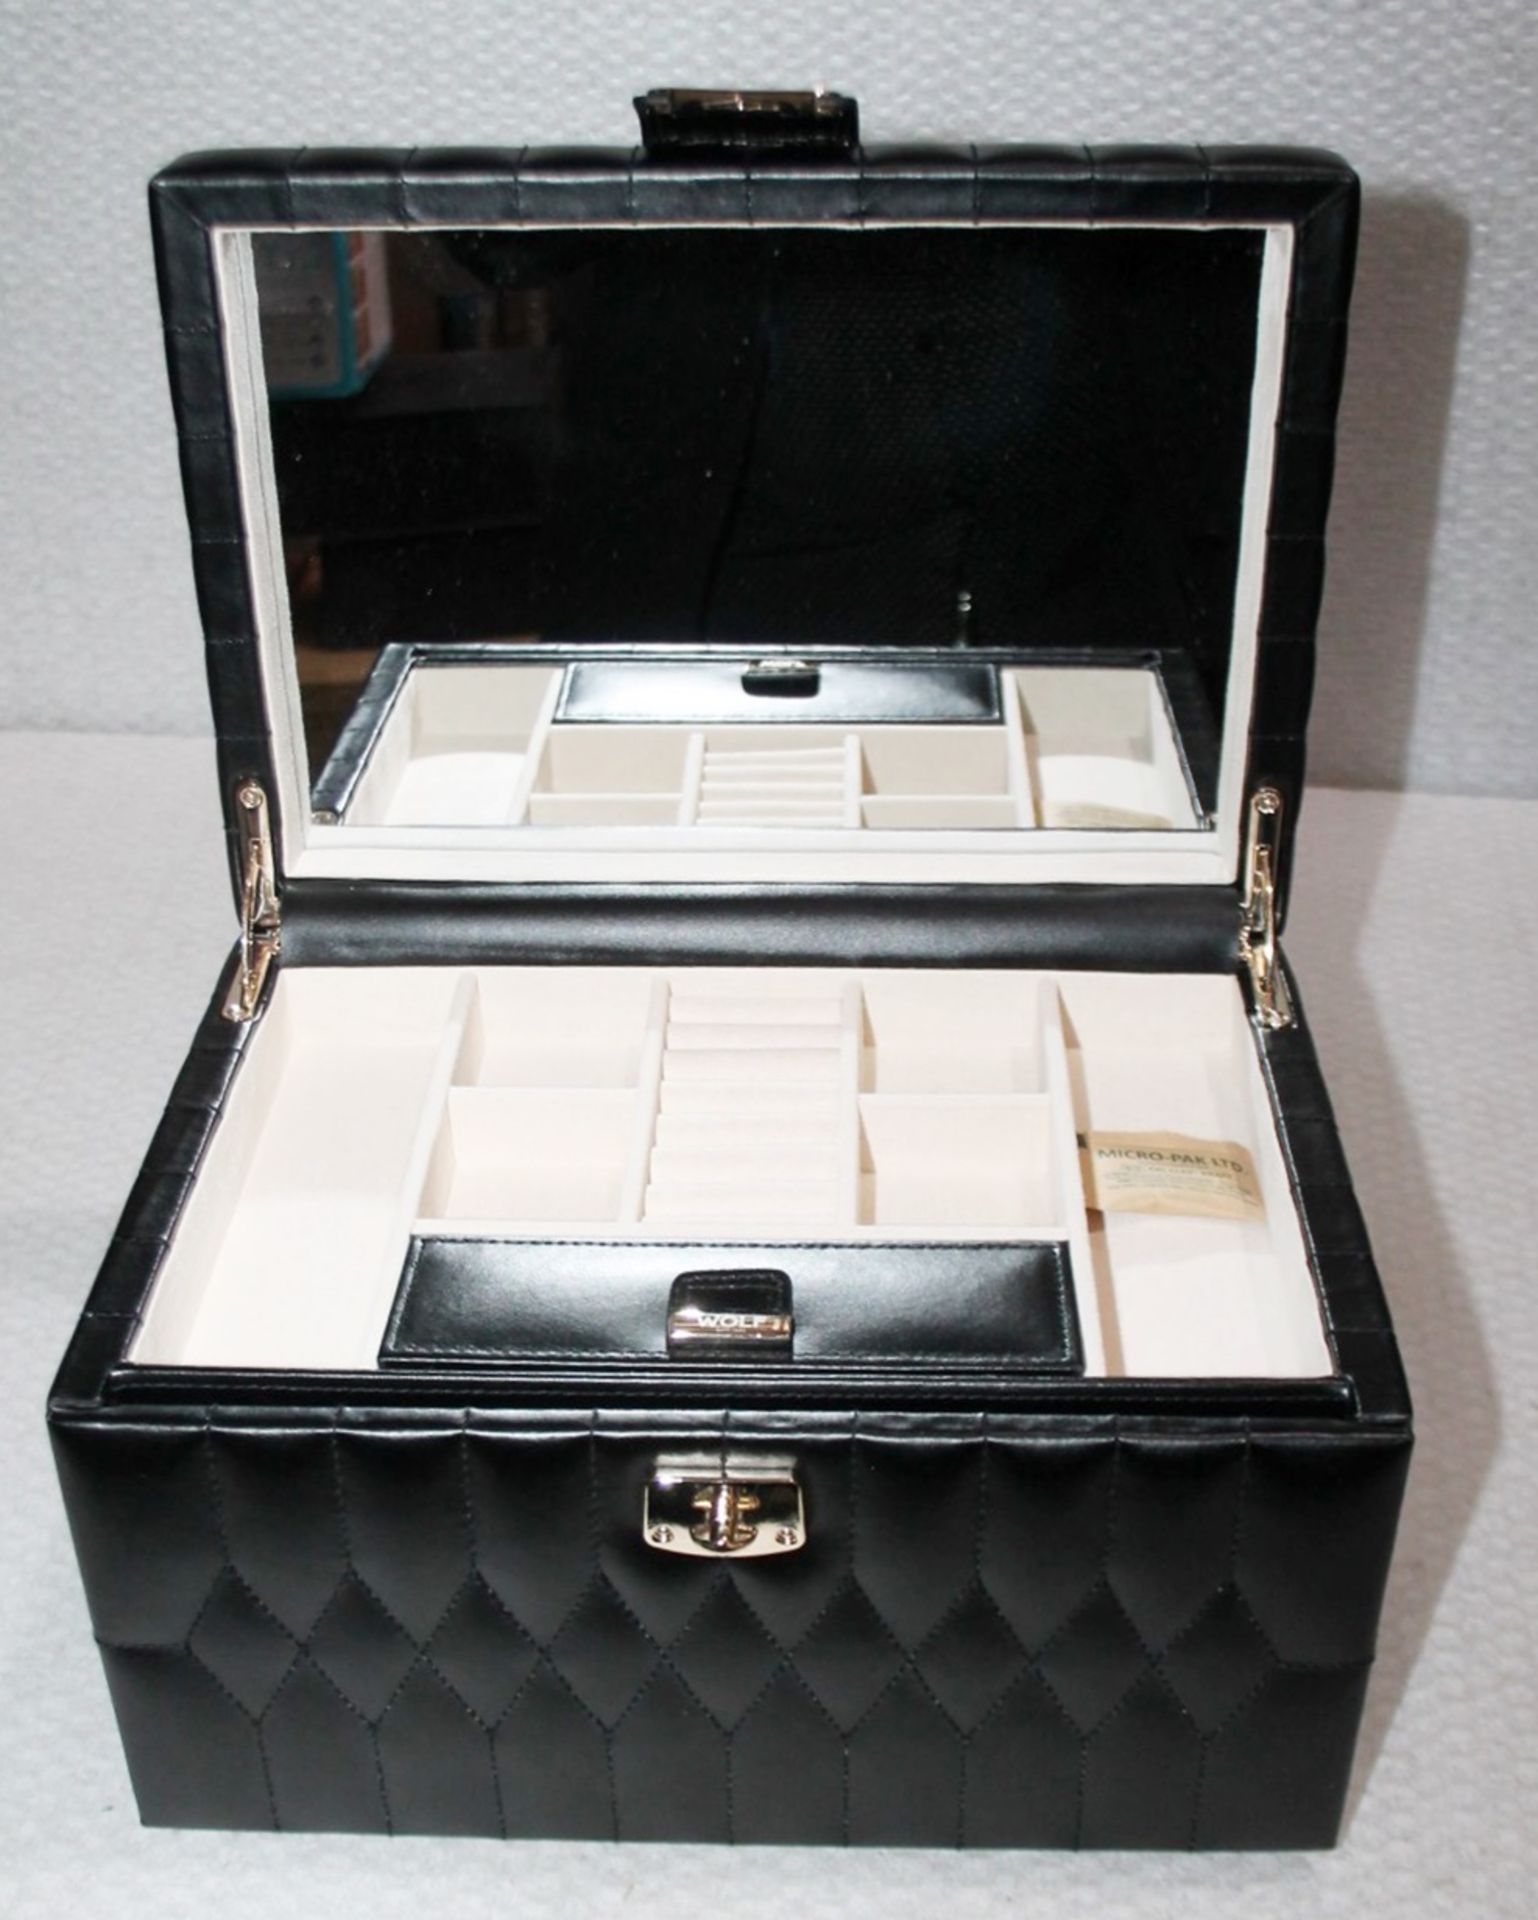 1 x WOLF 'Caroline' Jewellery Box Handcrafted Black Leather, With Travel Case - Original Price £241 - Image 9 of 17